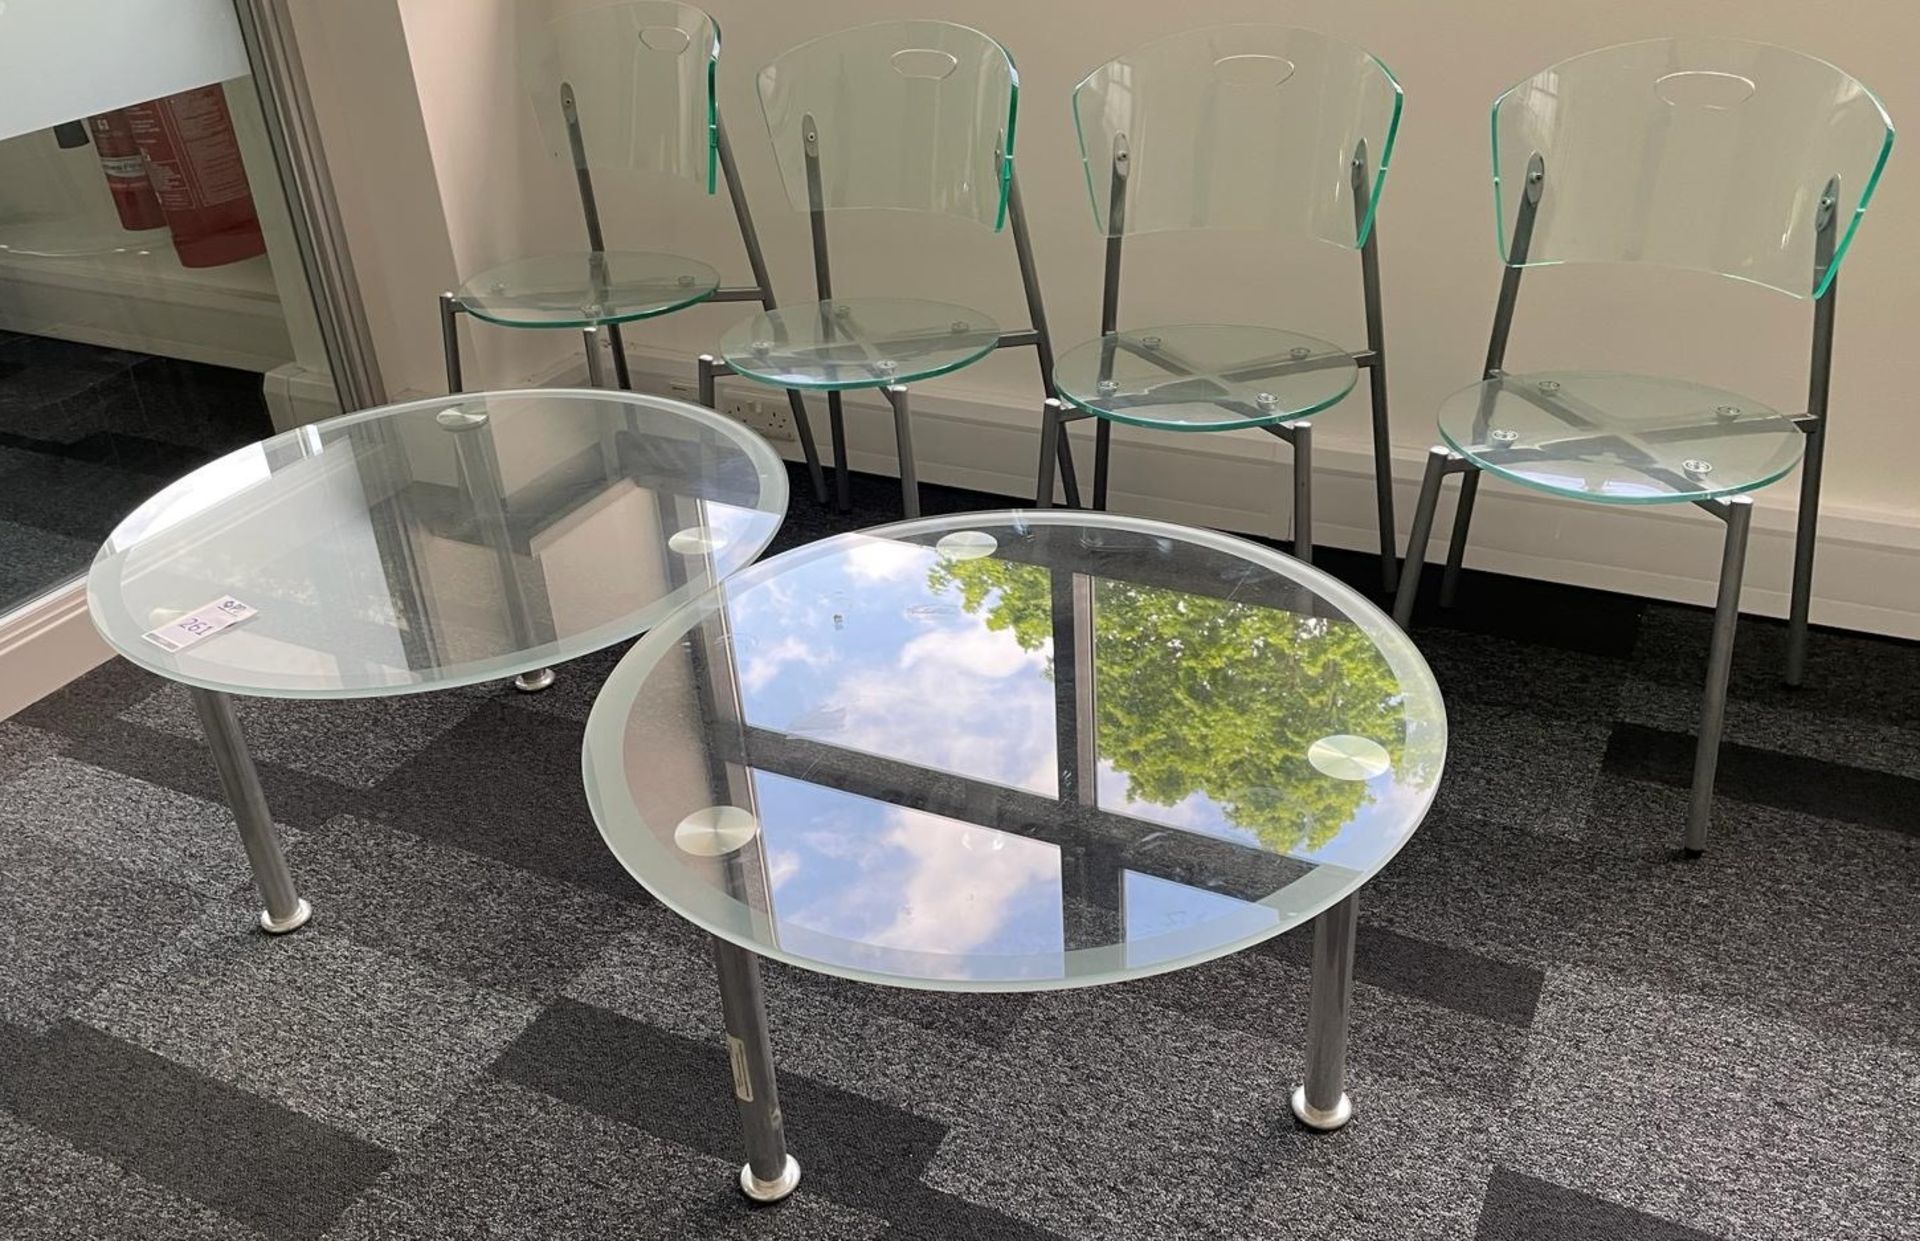 2 Comac Glass Coffee Tables & 4 Metal Framed Perspex Chairs (Located Rugby. Please Refer to